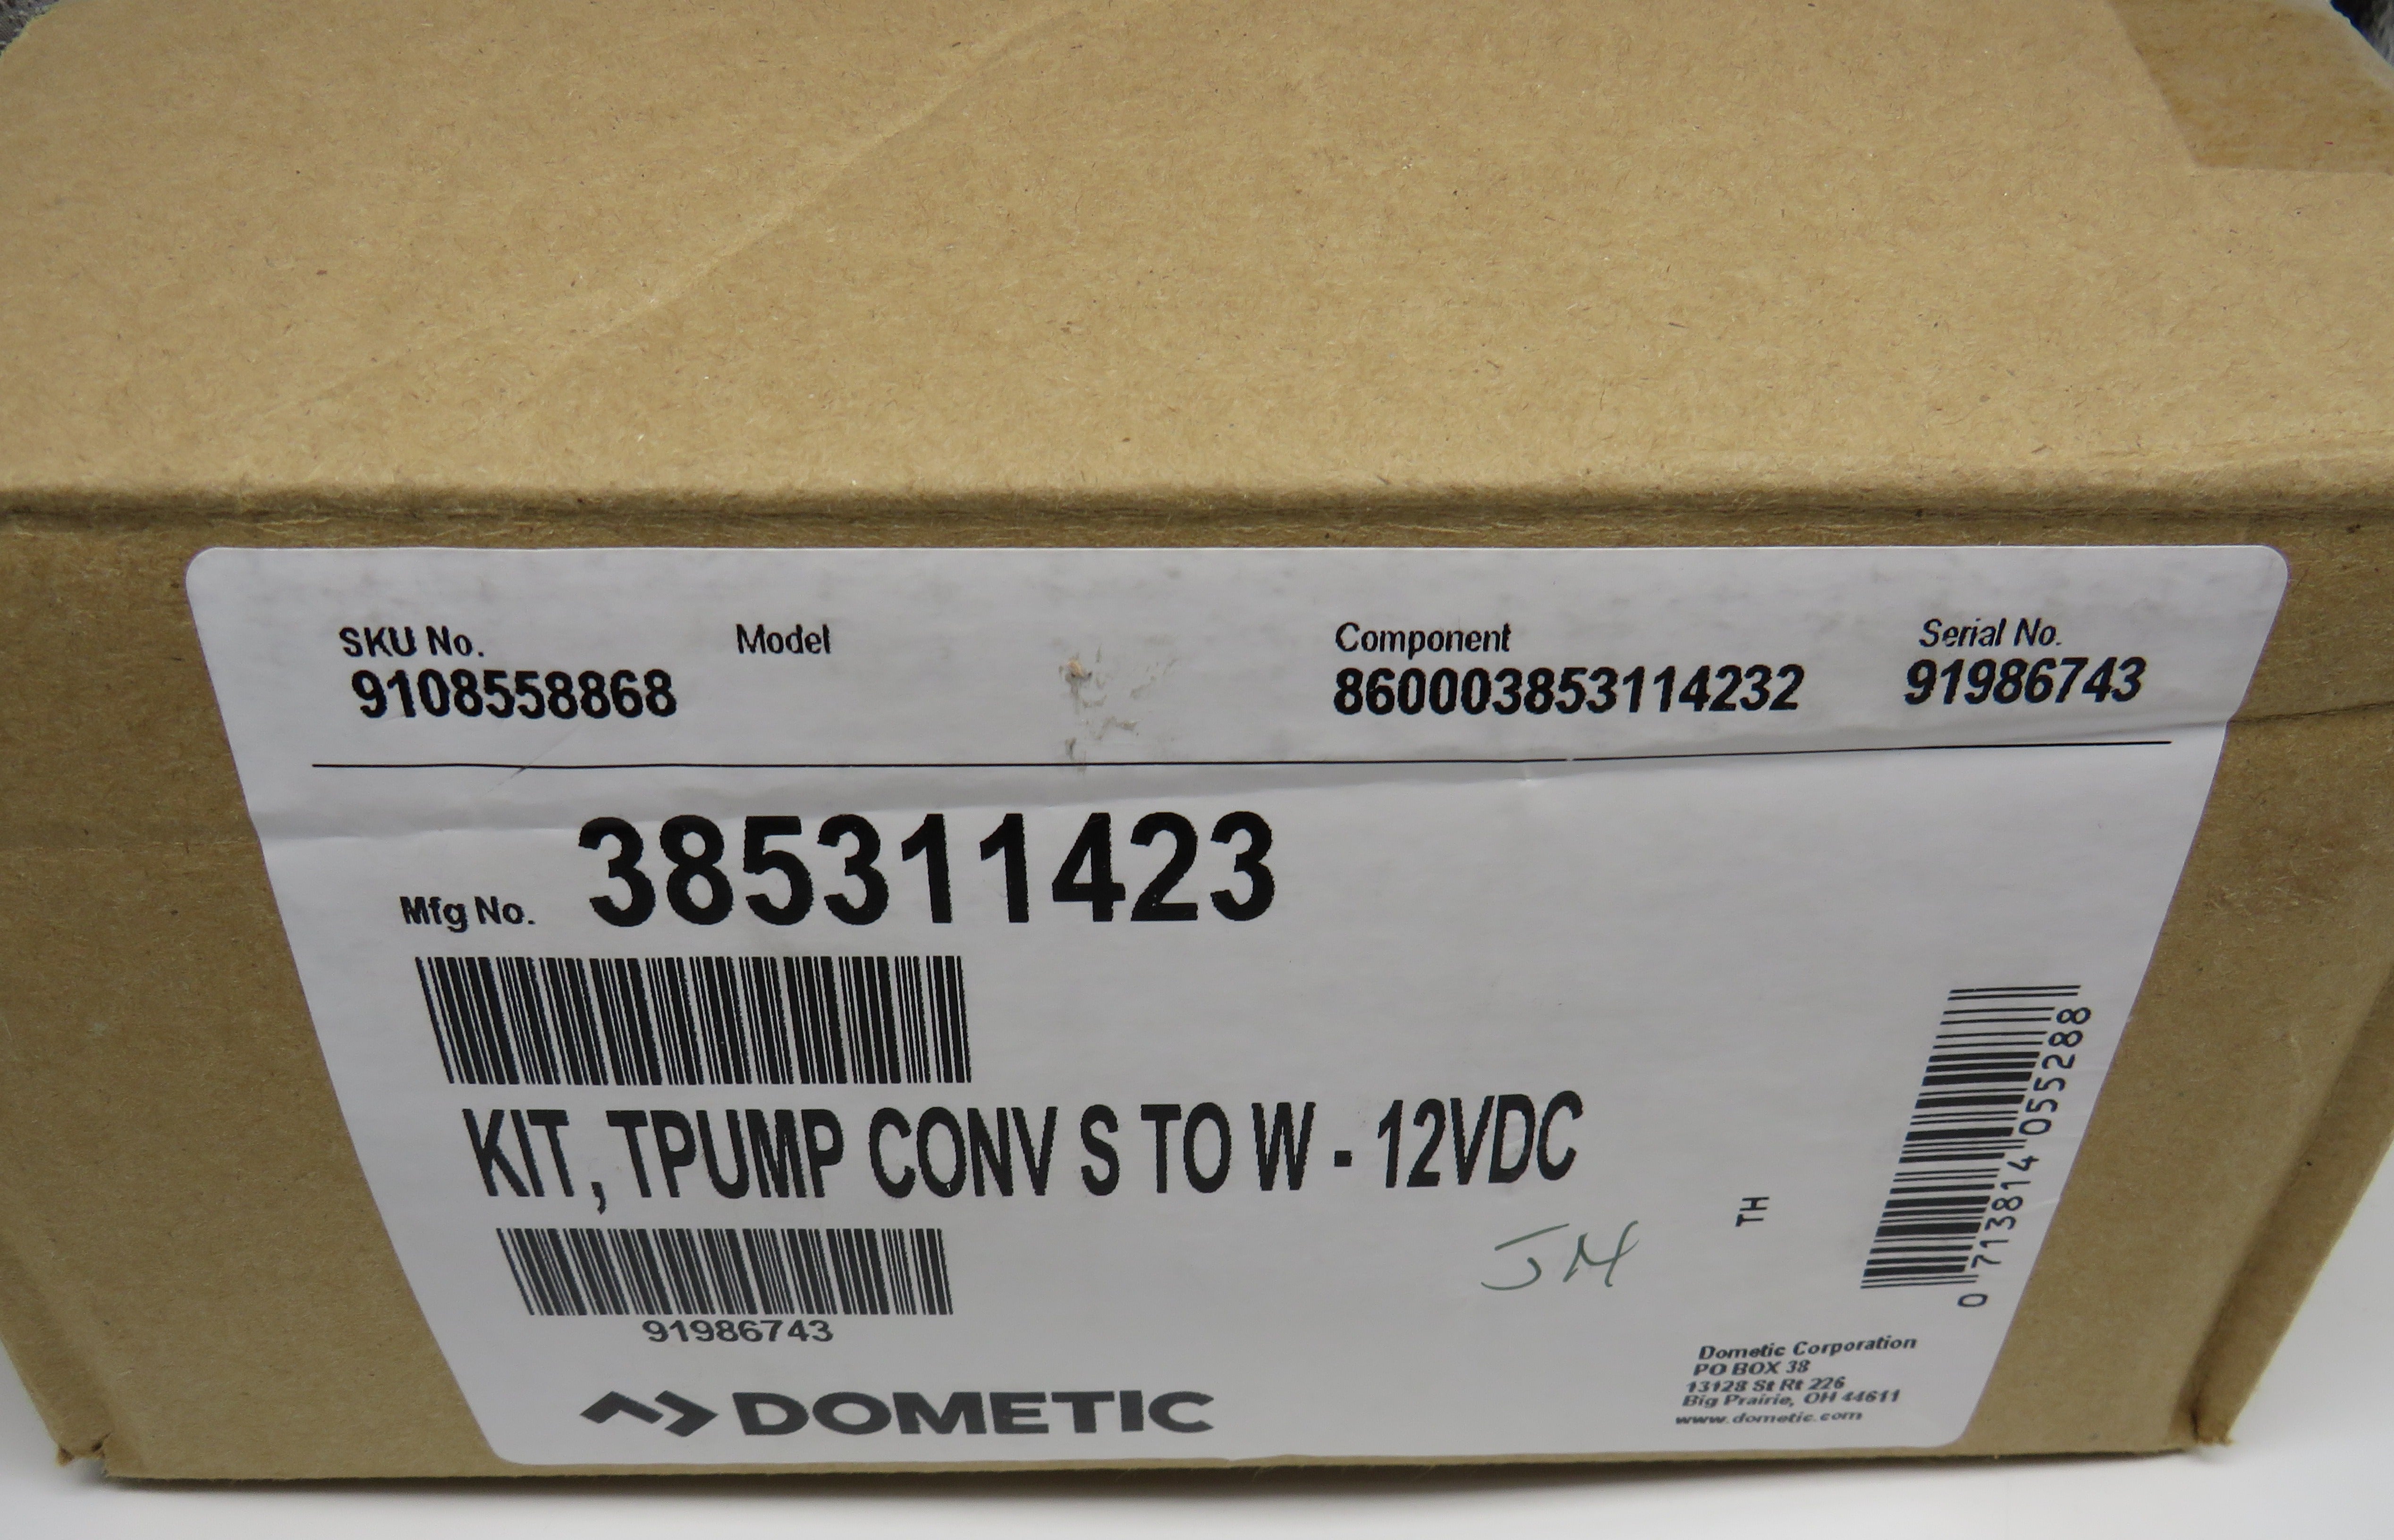 385311423 Sealand Dometic (Replaces 385310245) Kit, T Pump Conv S to W S/T pump 12VDC